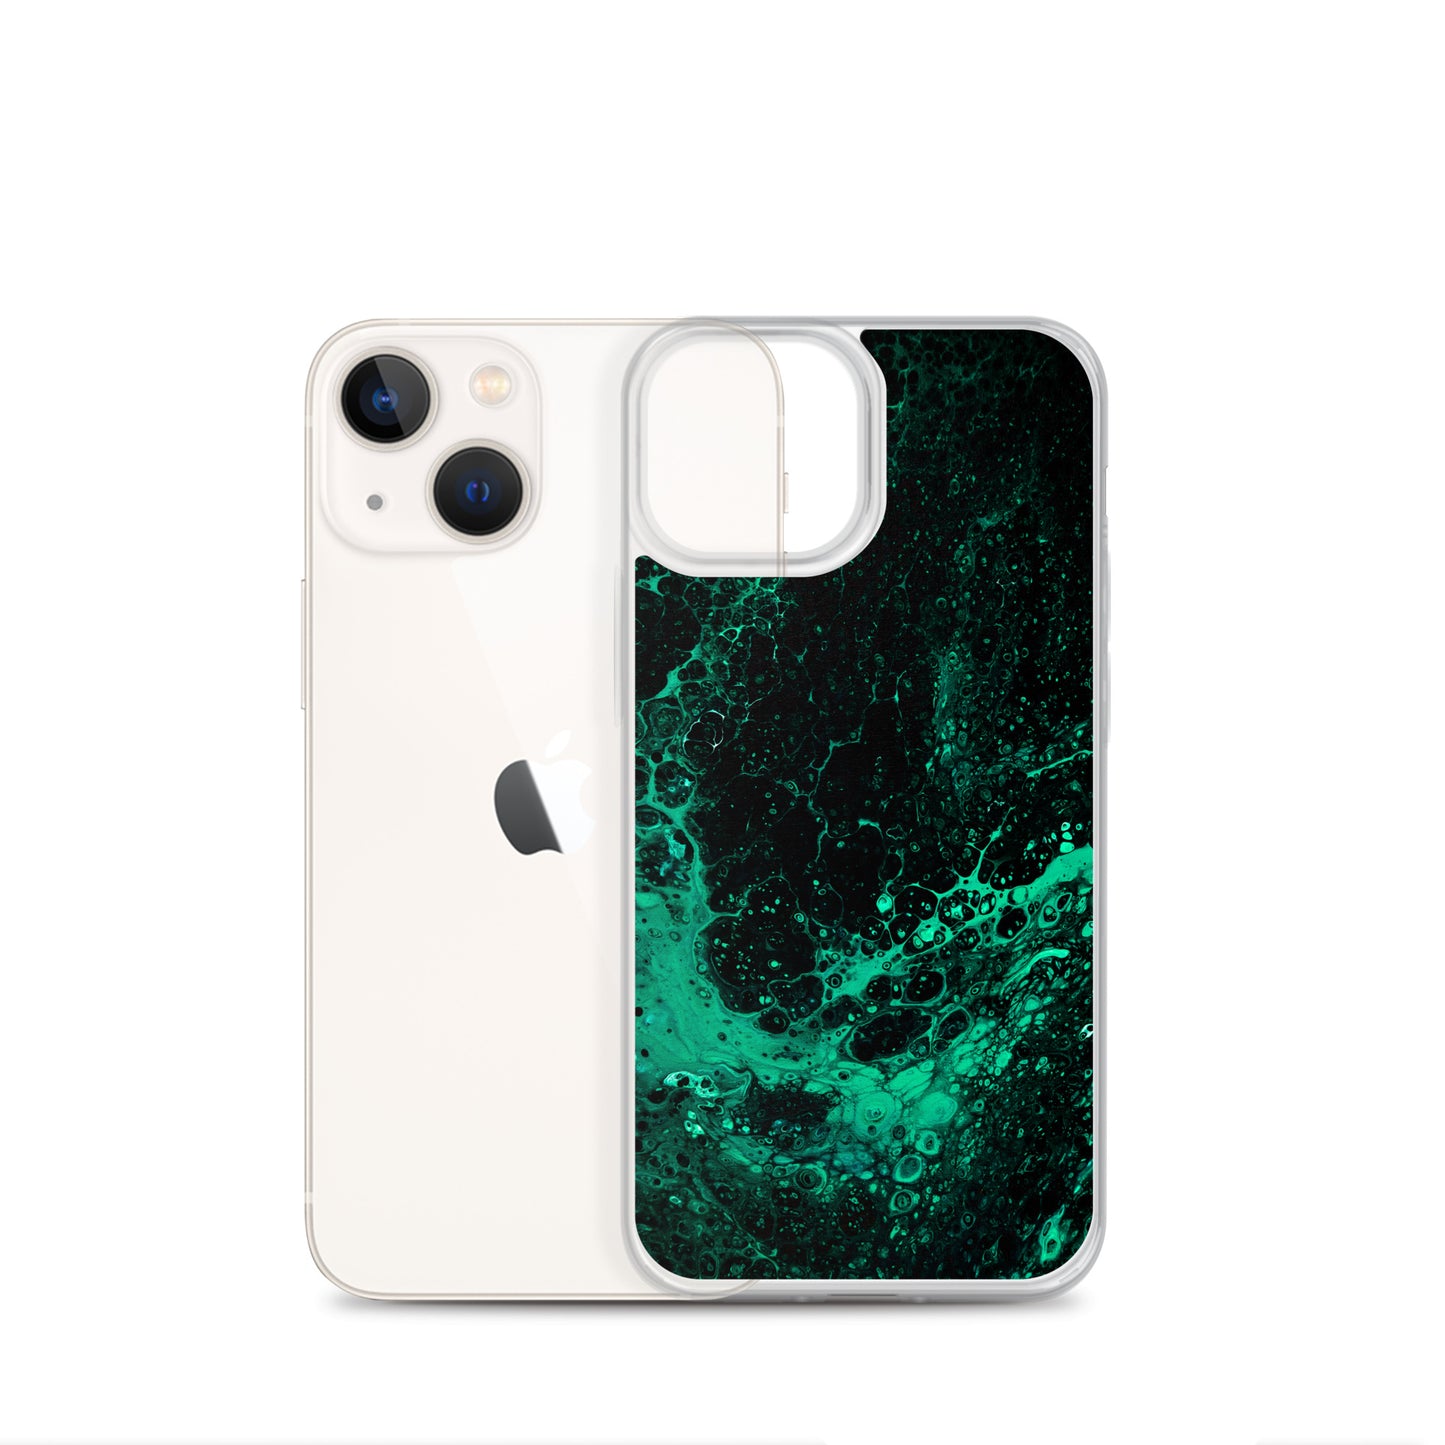 NightOwl Studio Custom Phone Case Compatible with iPhone, Ultra Slim Cover with Heavy Duty Scratch Resistant Shockproof Protection, Green Tide